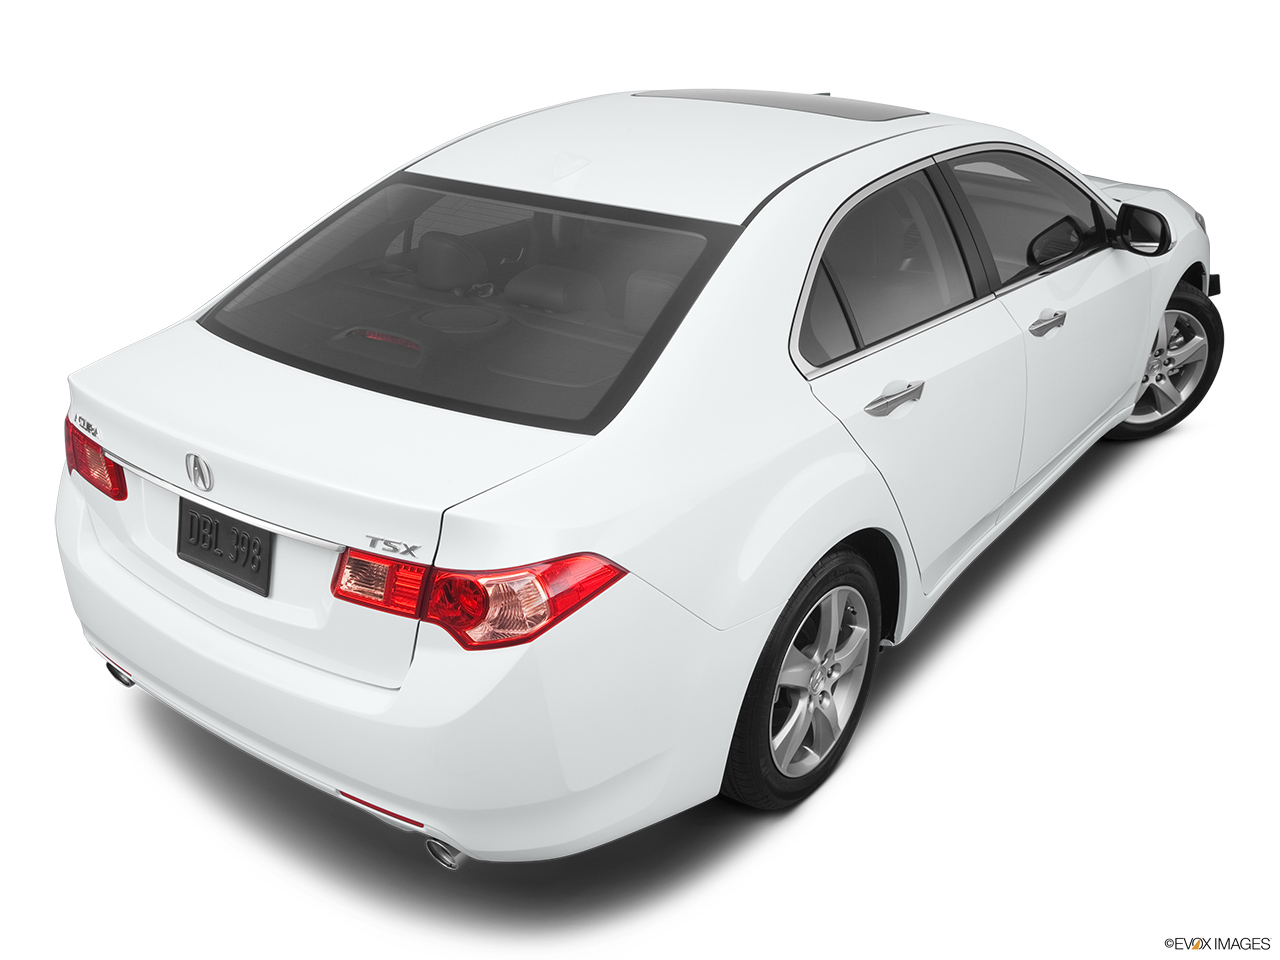 2011 Acura TSX TSX 5-speed Automatic Rear 3/4 angle view. 